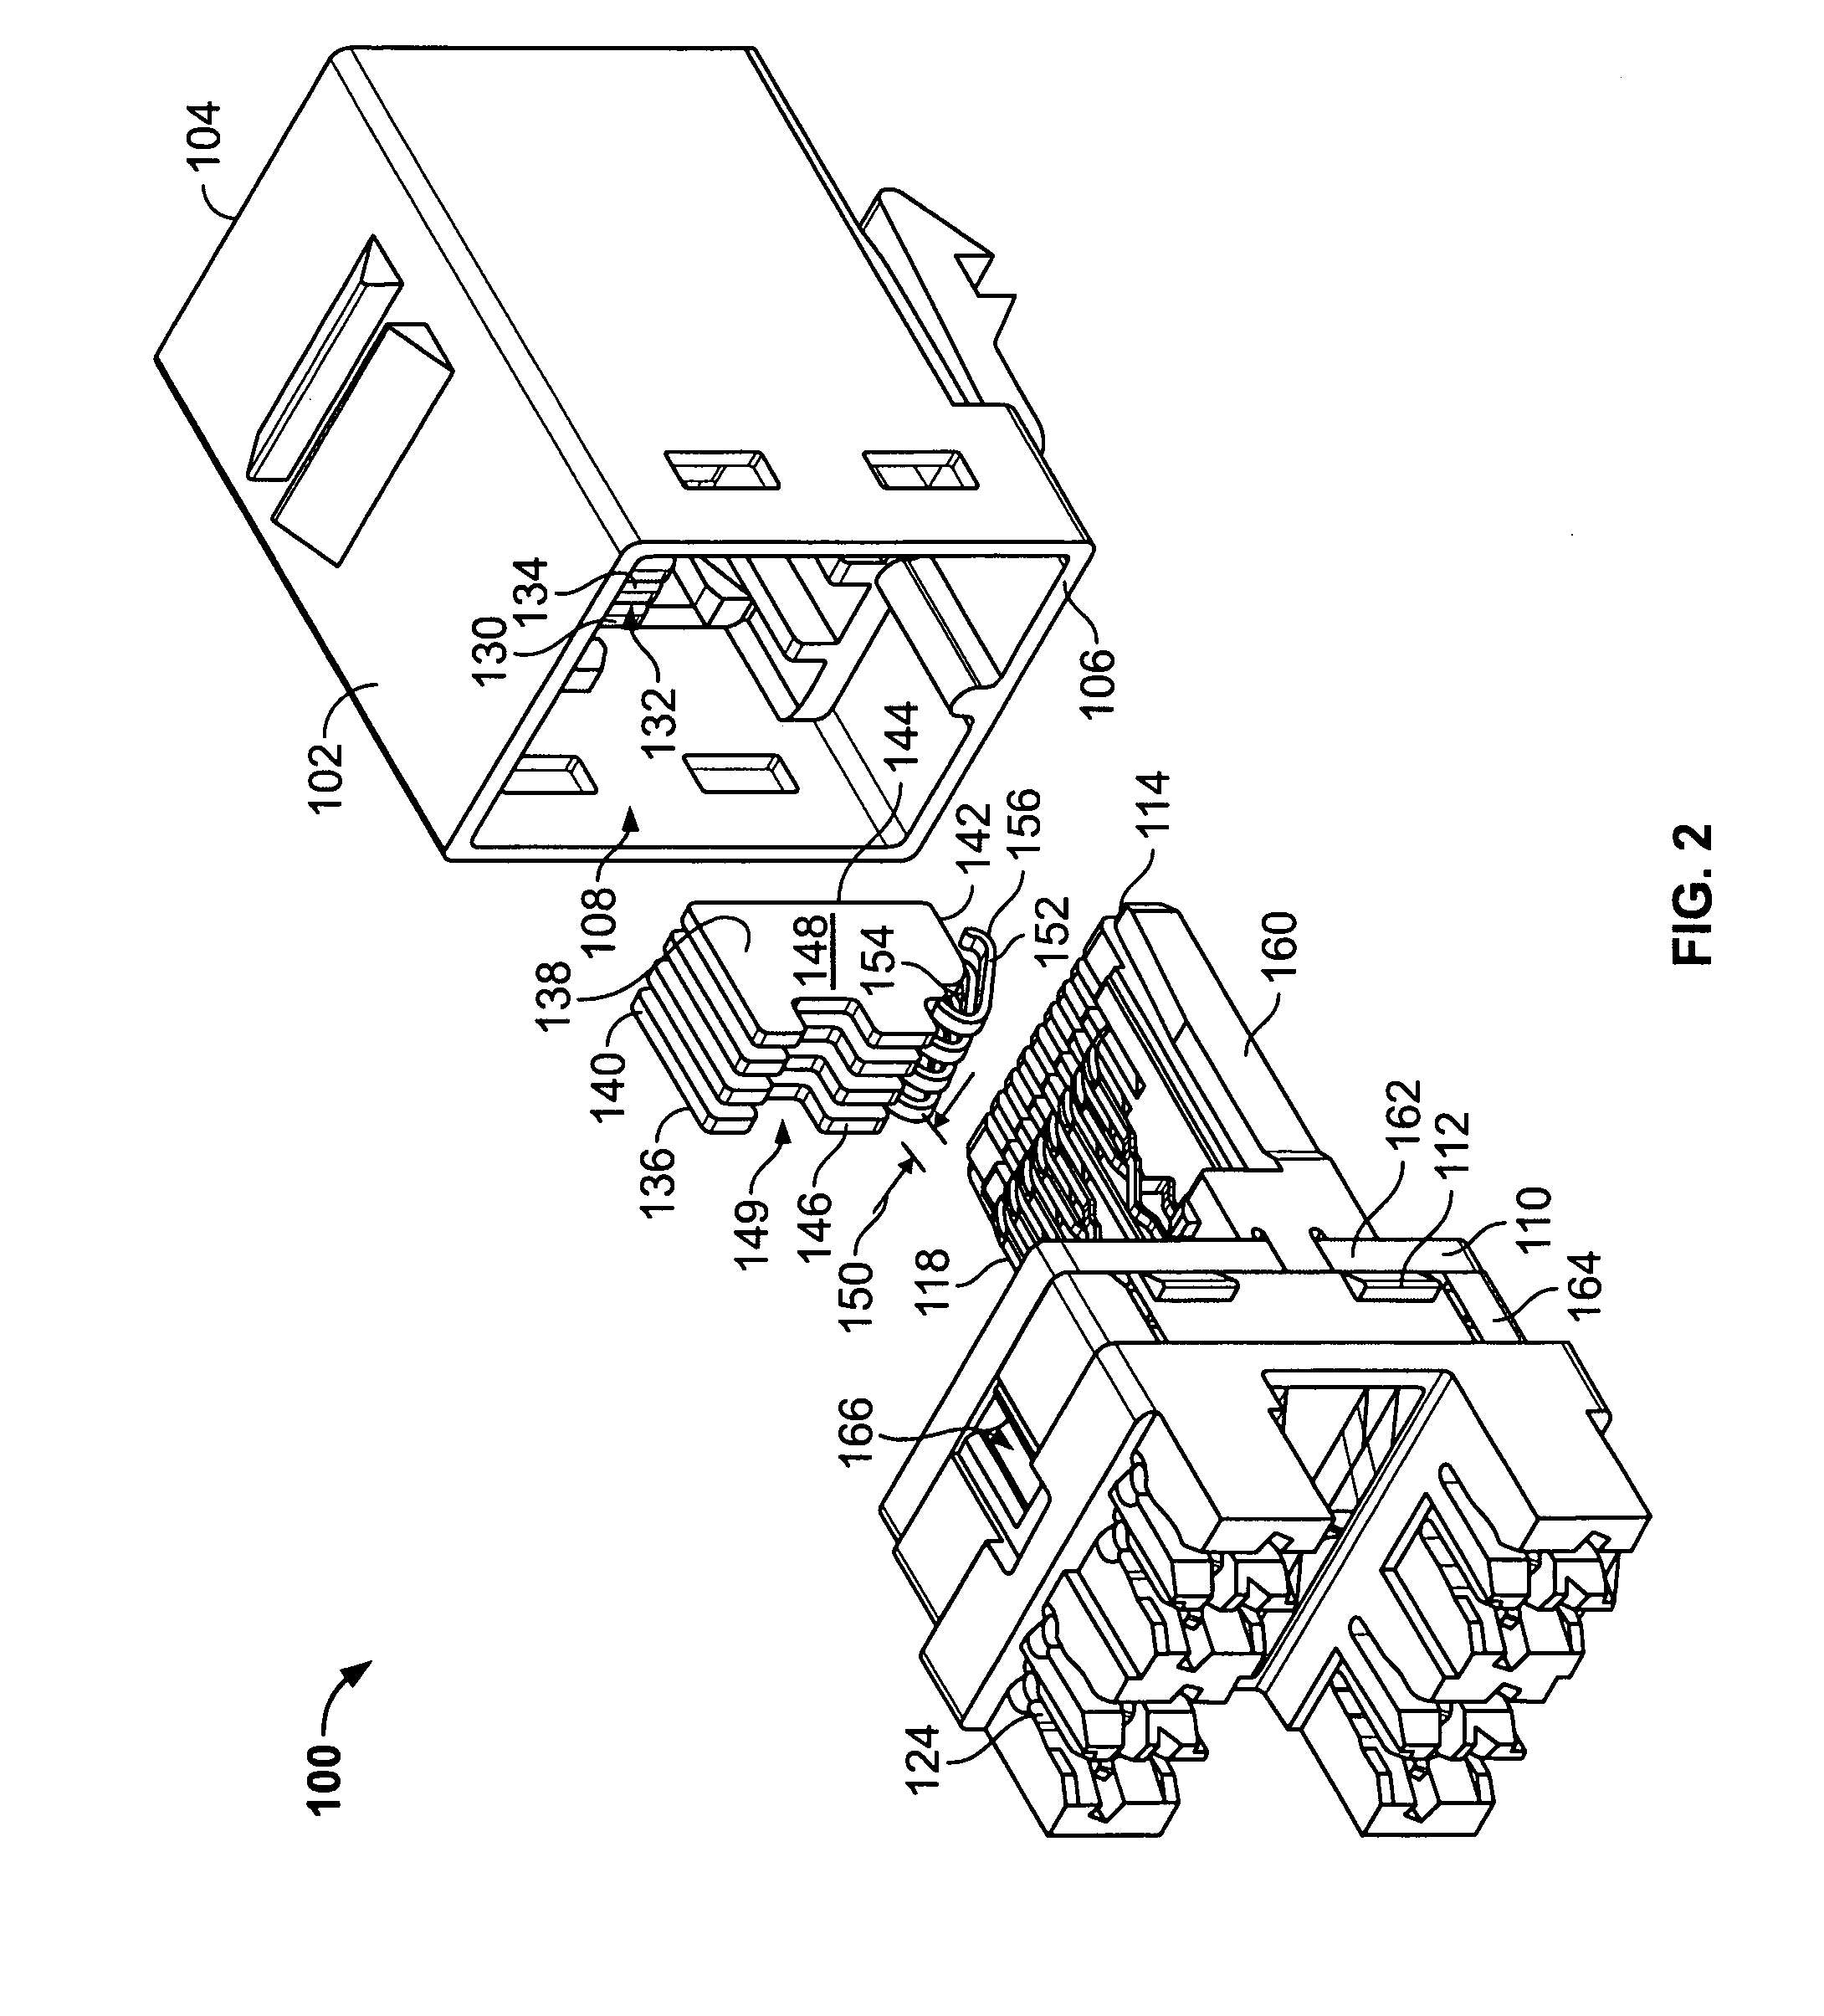 Electrical connector having contact plates